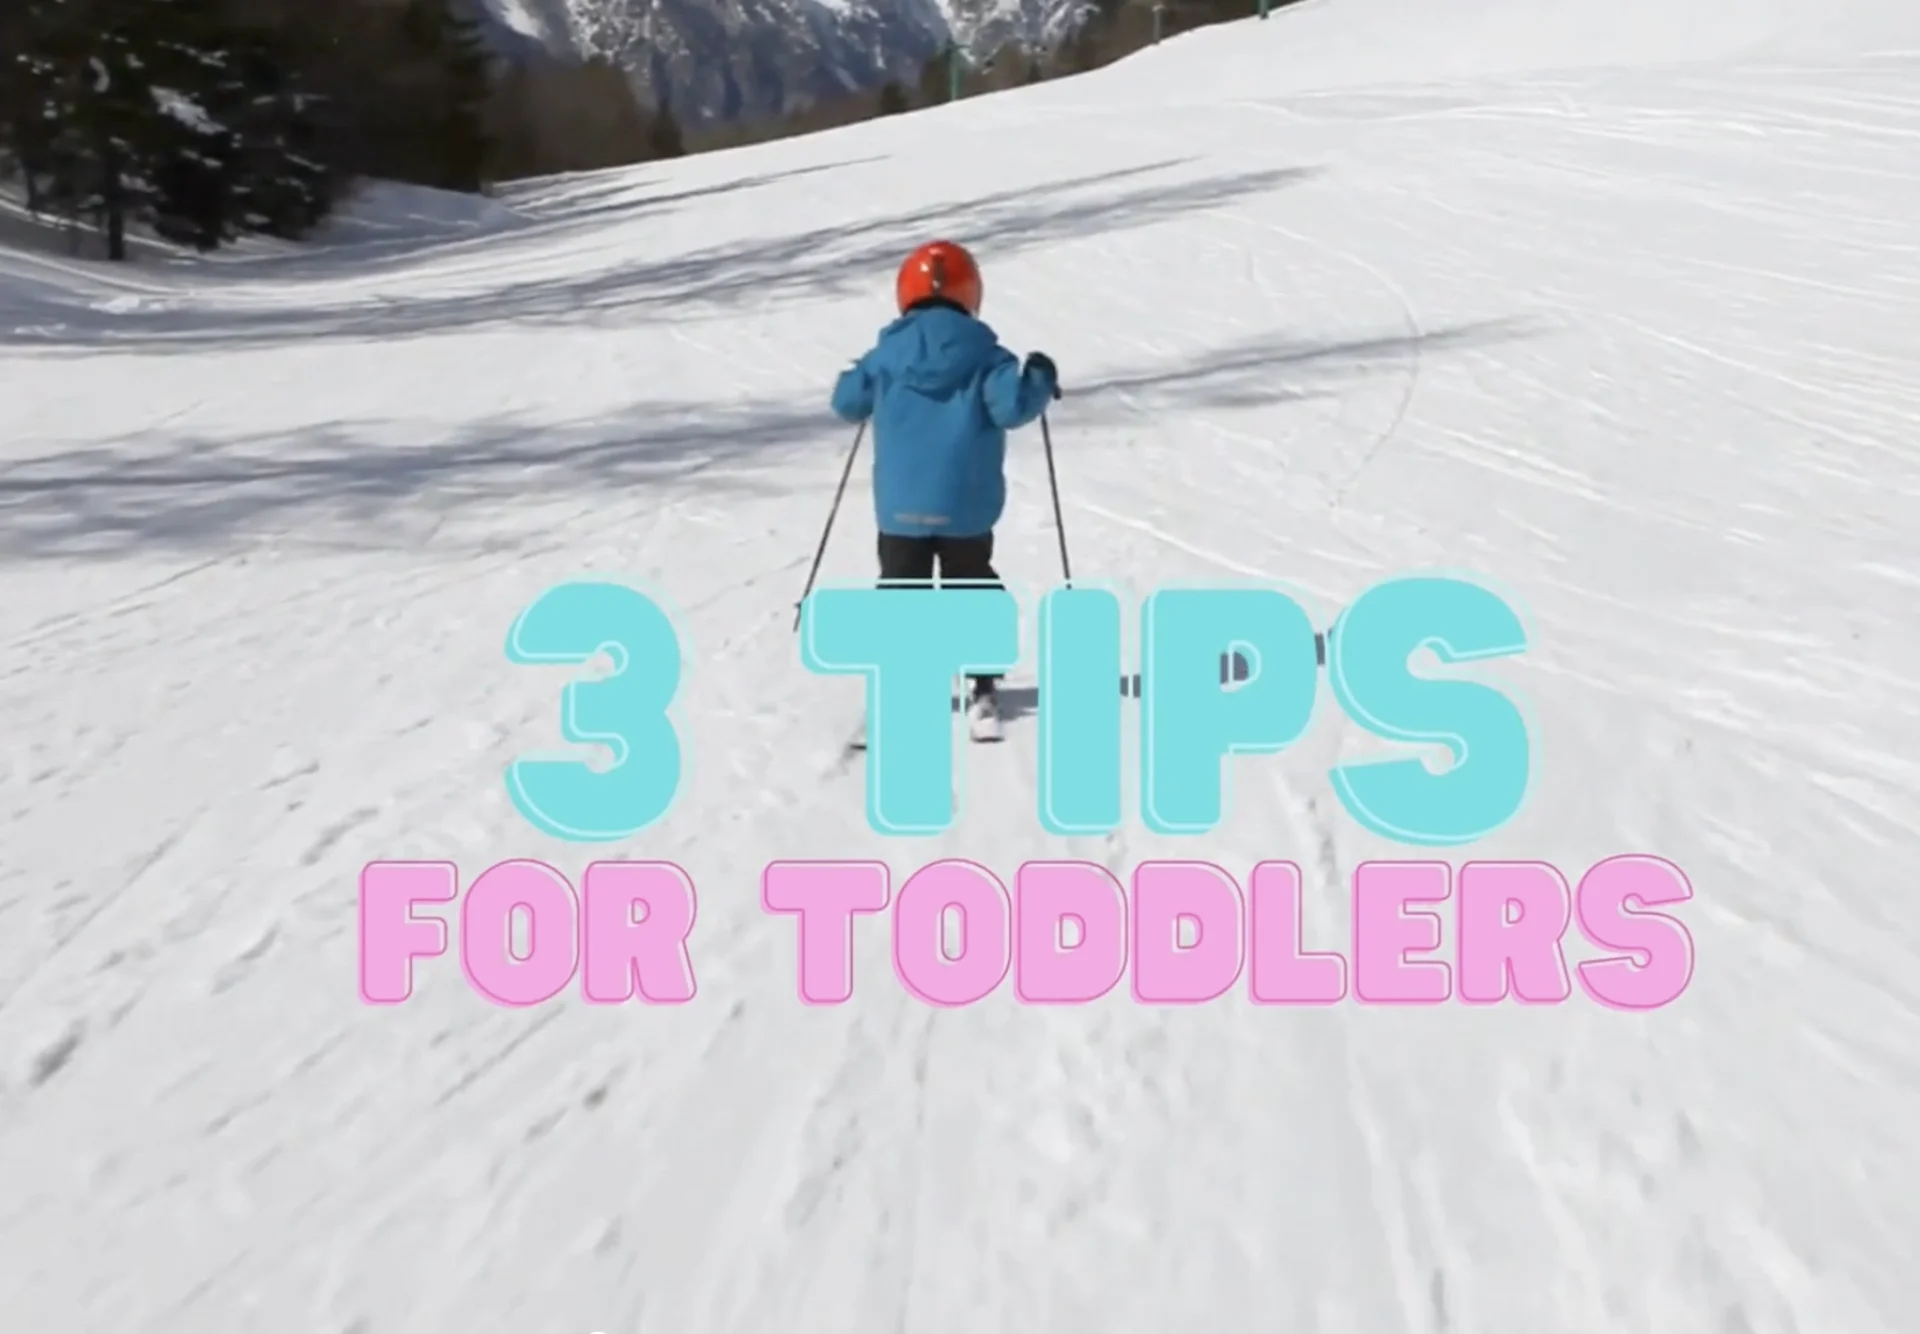 Master the slopes with your little one - 3 skiing tips for parents and toddlers